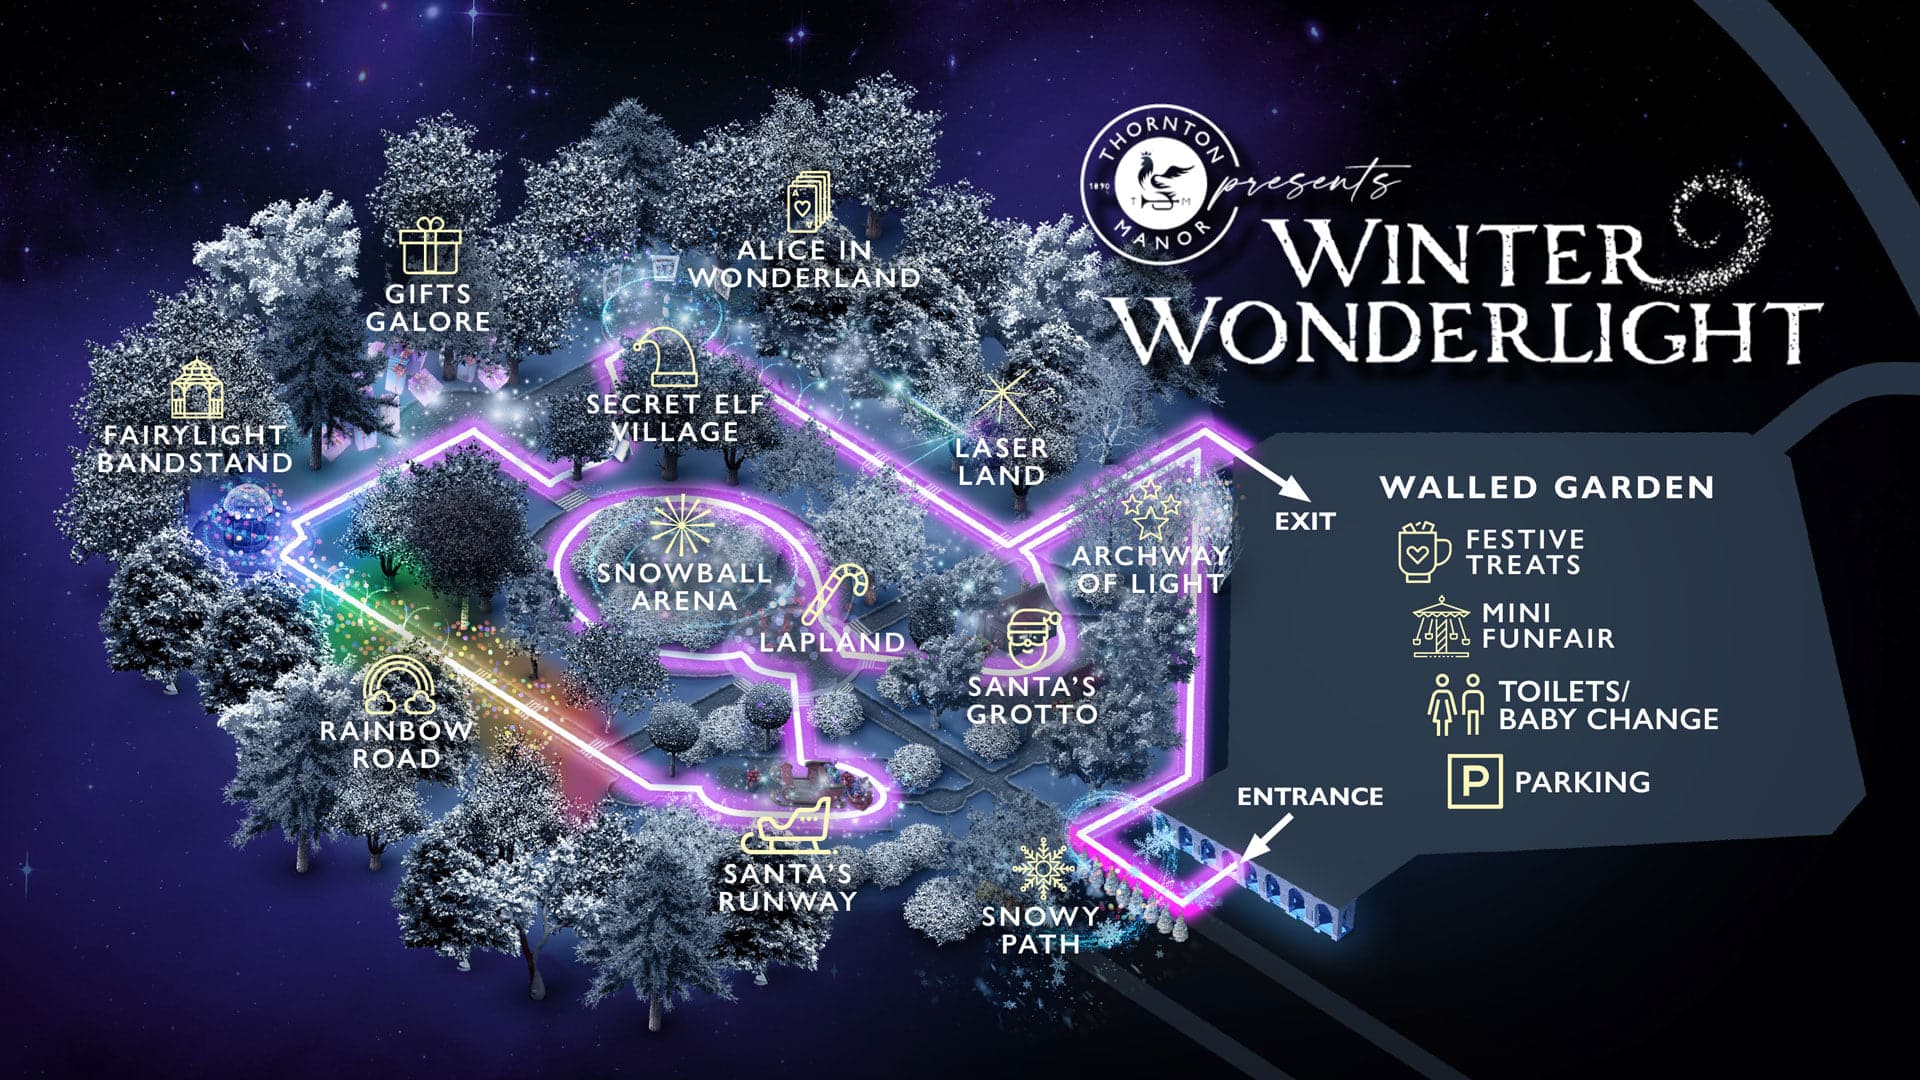 A poster for the Winter Wonderlight trail at Thornton Manor.